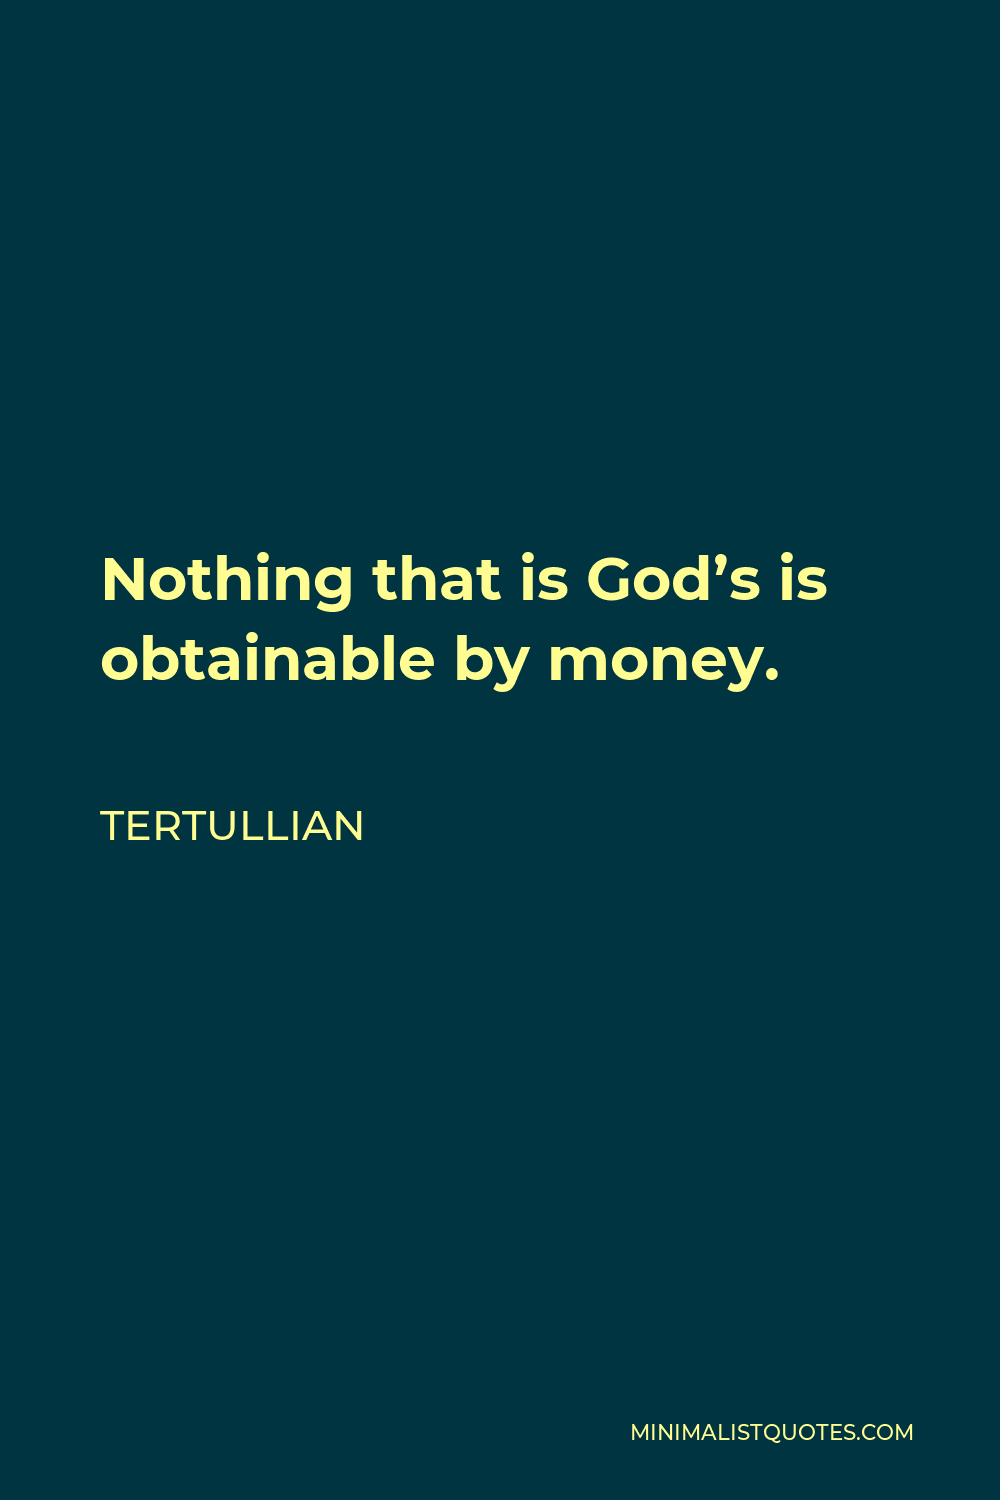 Tertullian Quote - Nothing that is God’s is obtainable by money.